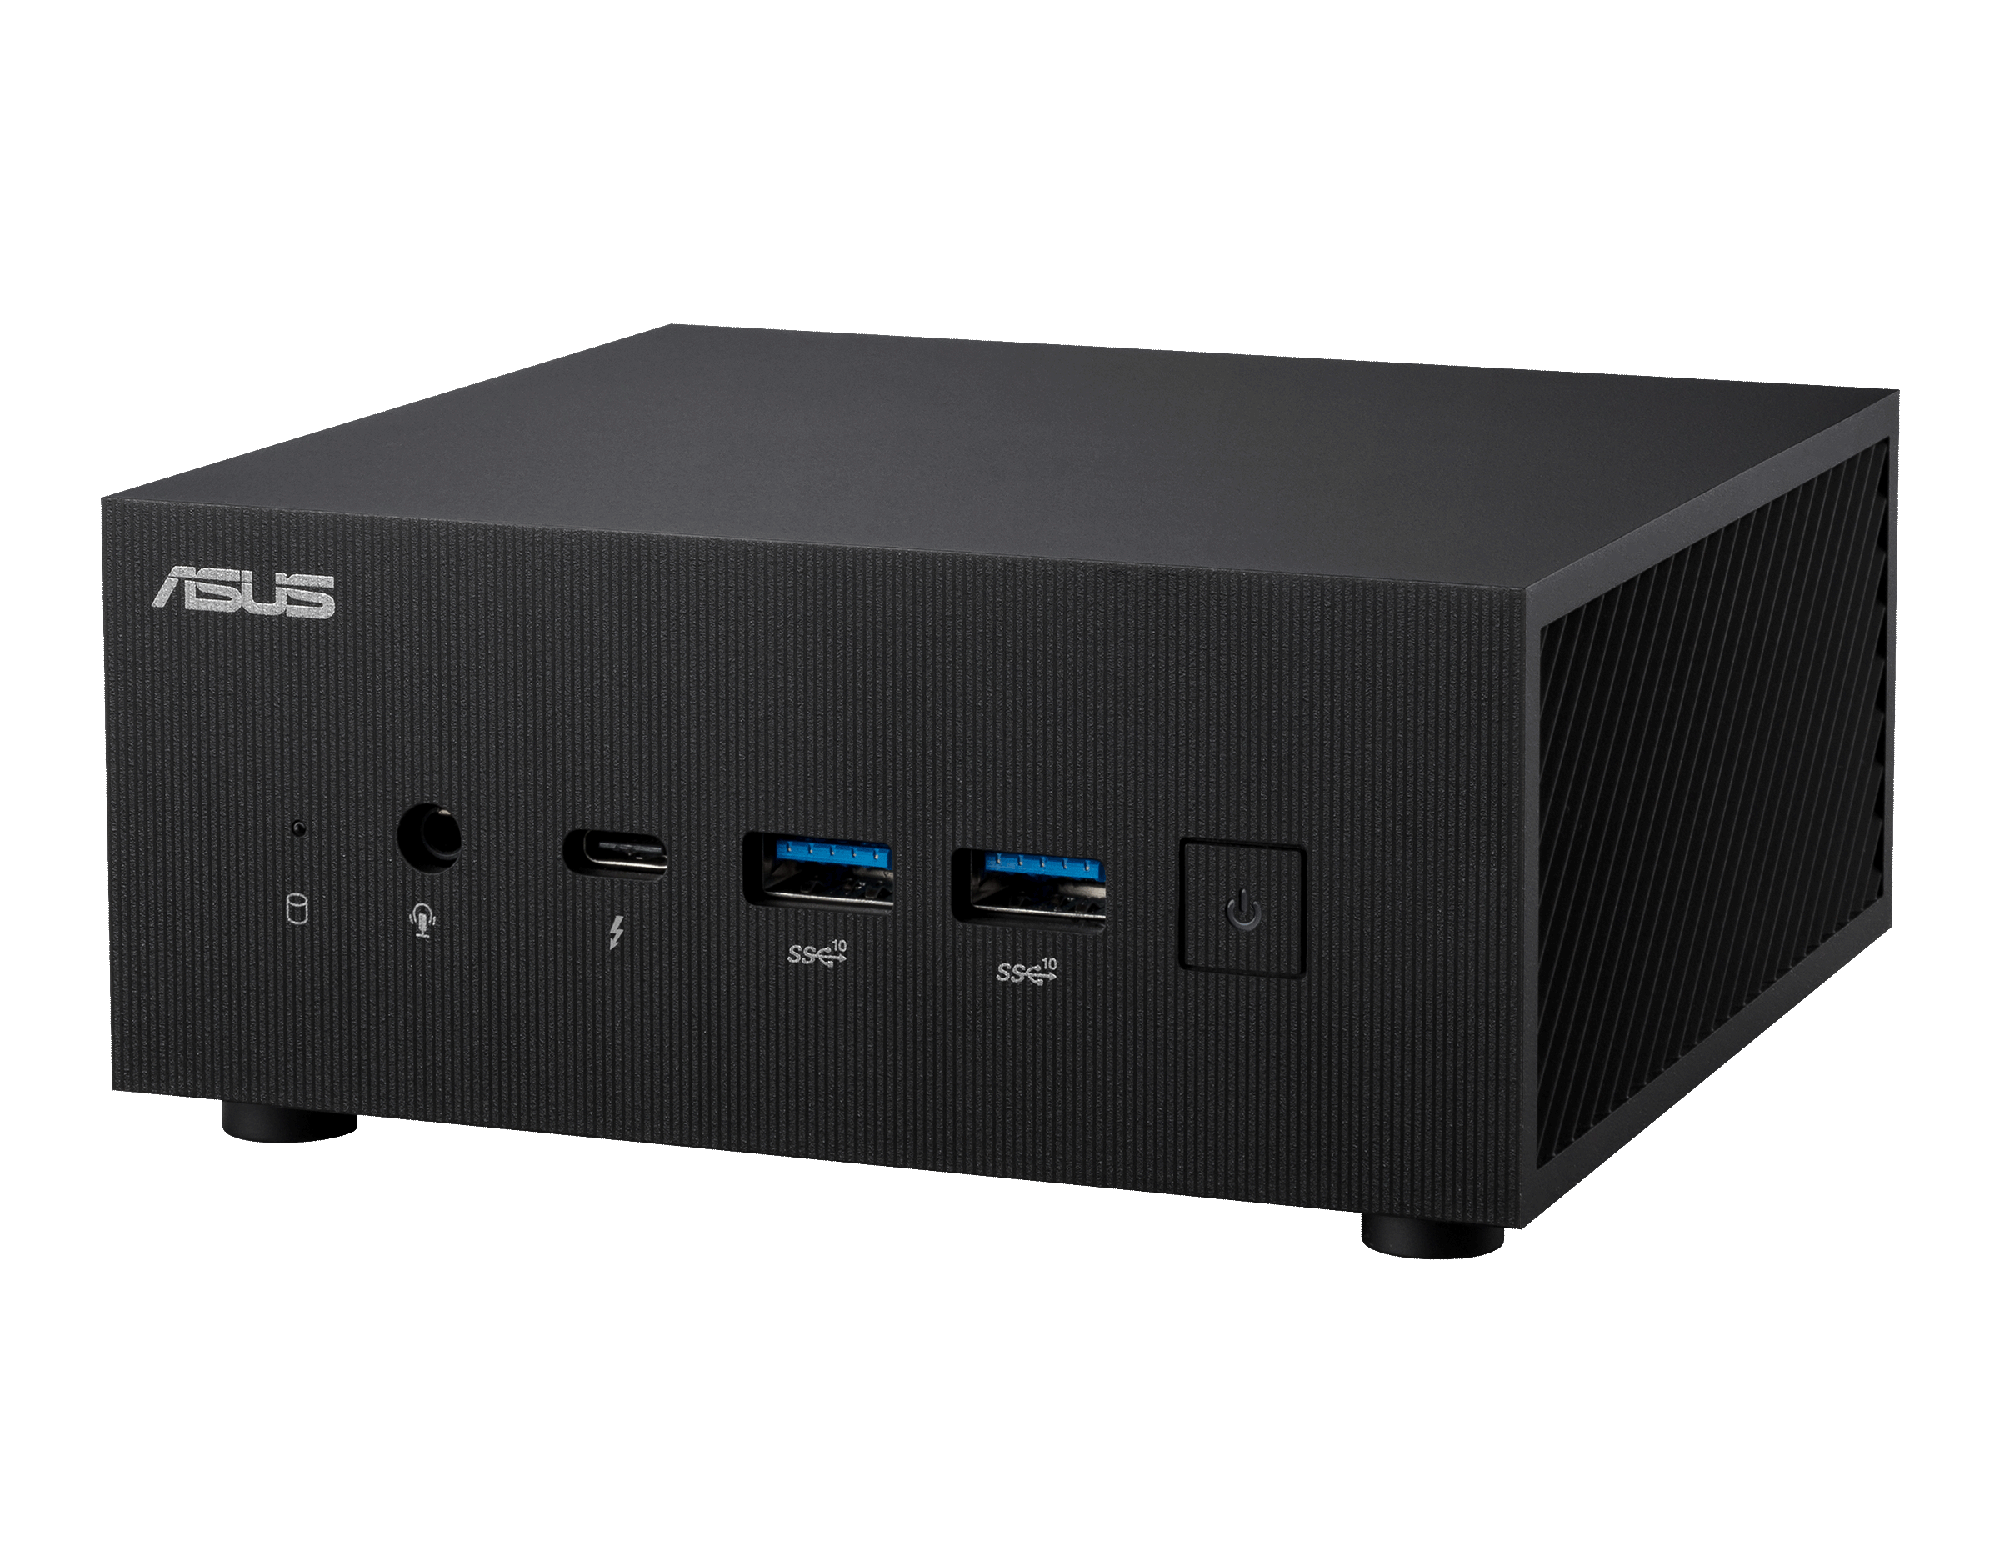 Asus announces PN64-E1 Intel Raptor Lake mini PCs with dual Thunderbolt 4 connectors and up to five video outs